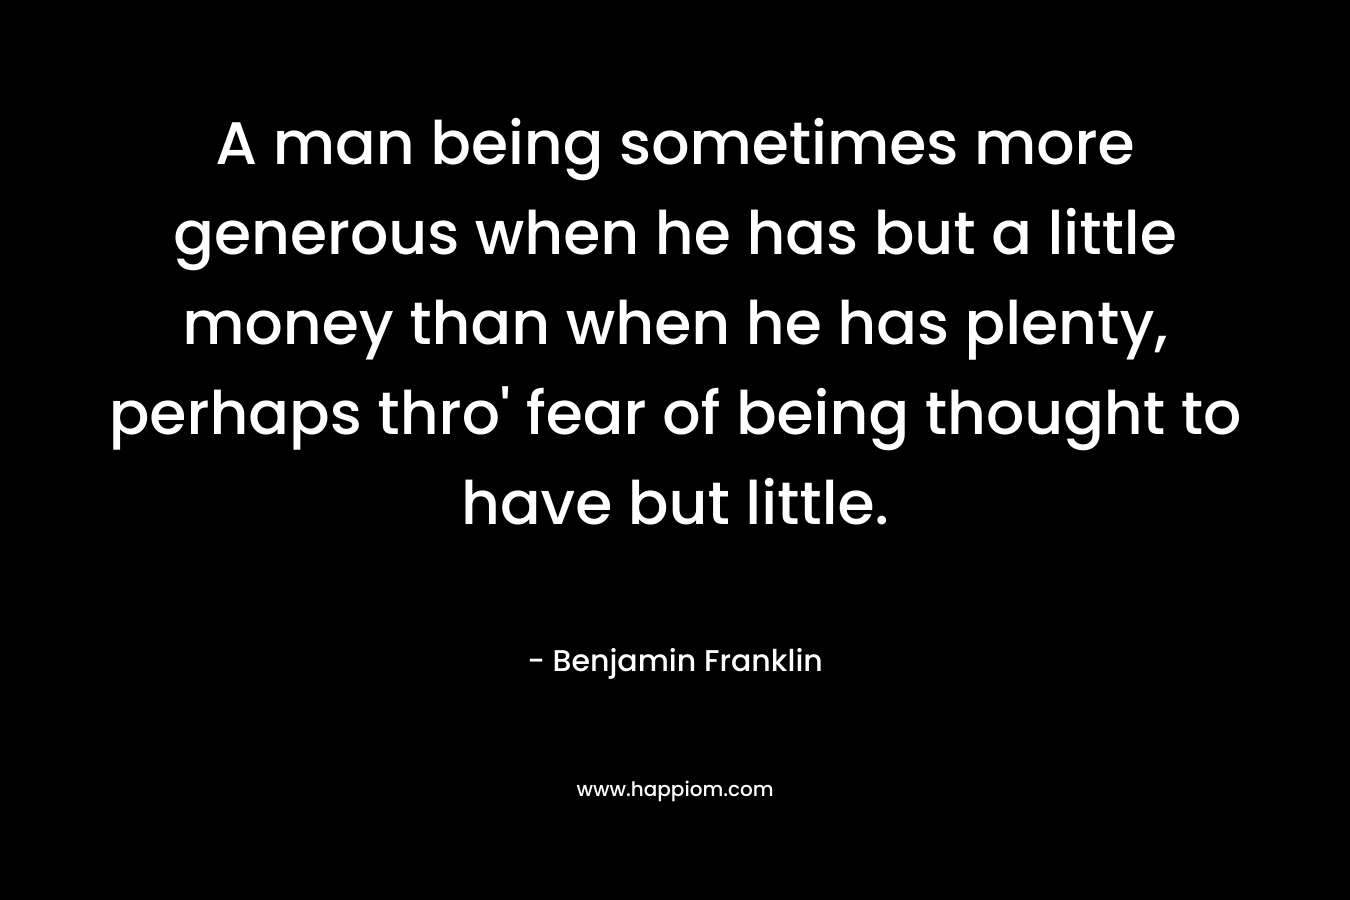 A man being sometimes more generous when he has but a little money than when he has plenty, perhaps thro’ fear of being thought to have but little. – Benjamin Franklin